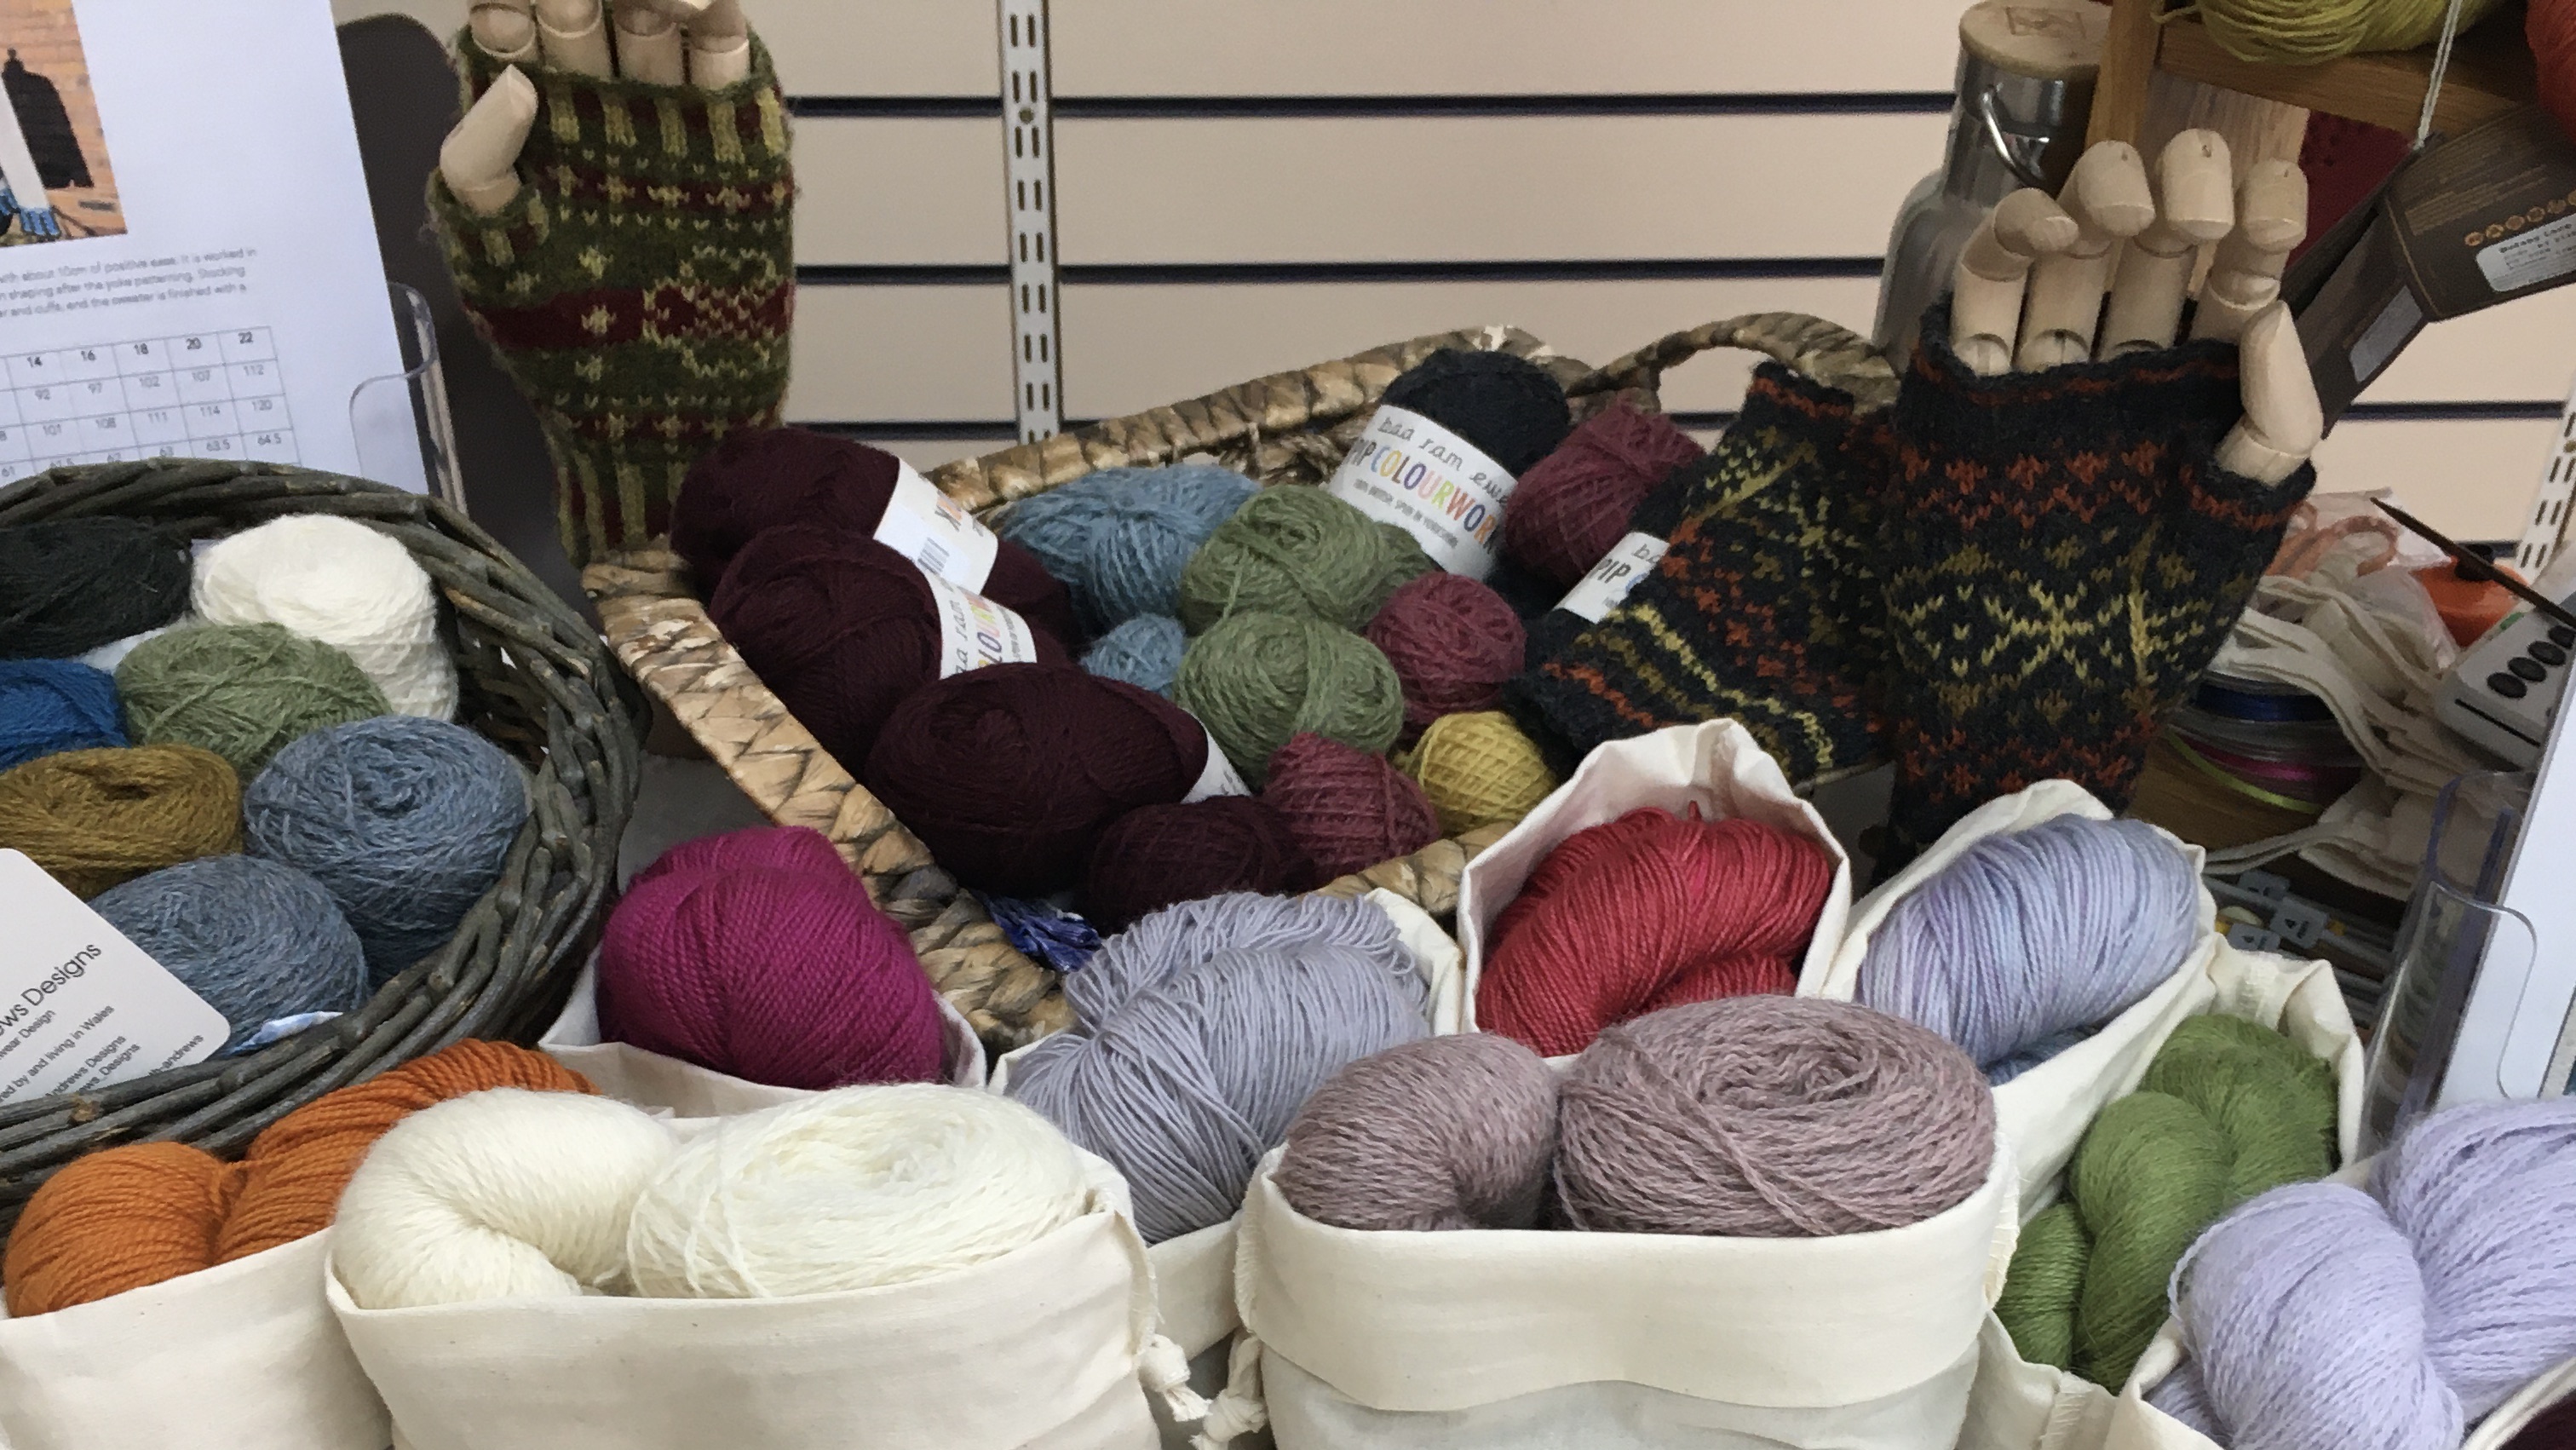 A close-up shot of part of my table at the pop-up shop in Feb 2020 - various yarn kits, patterns and knitted samples arrayed on the table.